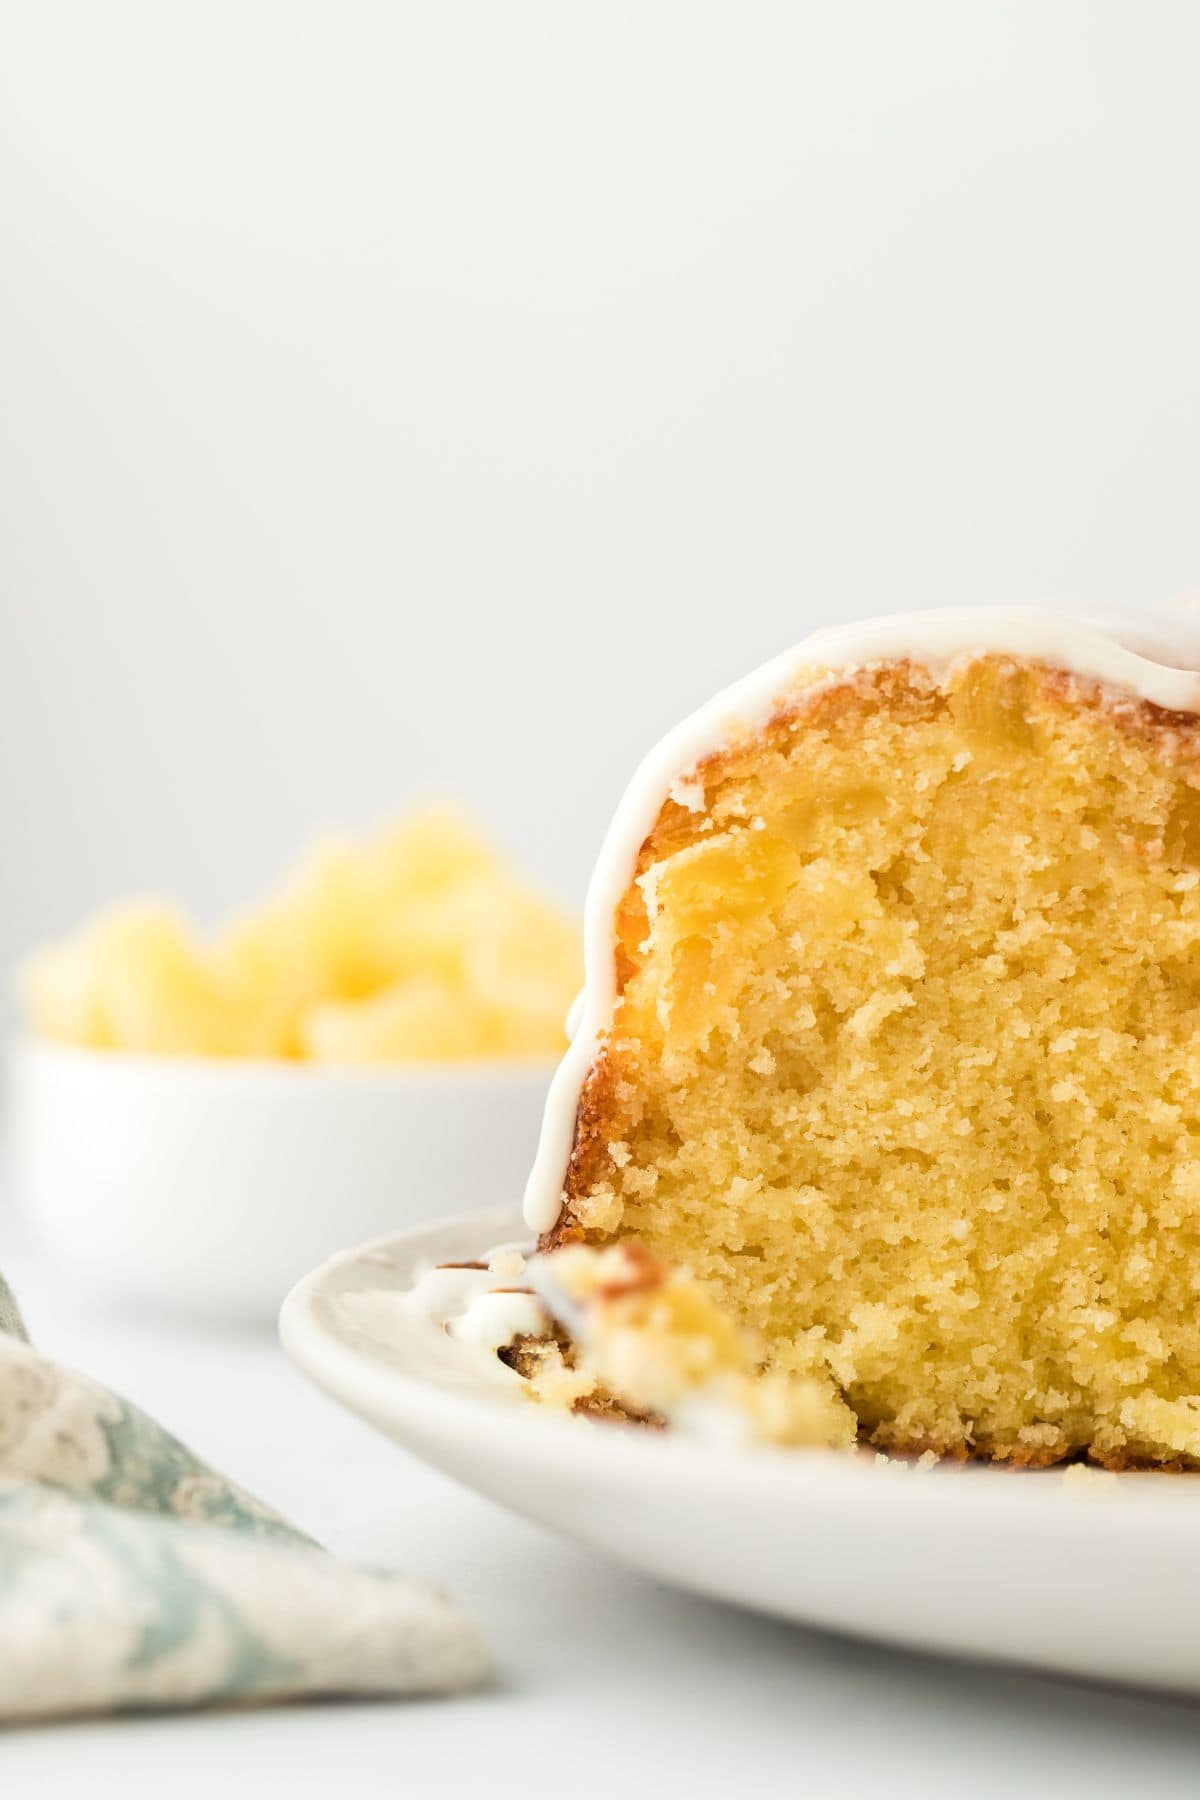 Close up of a slice of pineapple pound cake, showing its moist and fluffy texture, with a bowl of pineapple chunks in the background